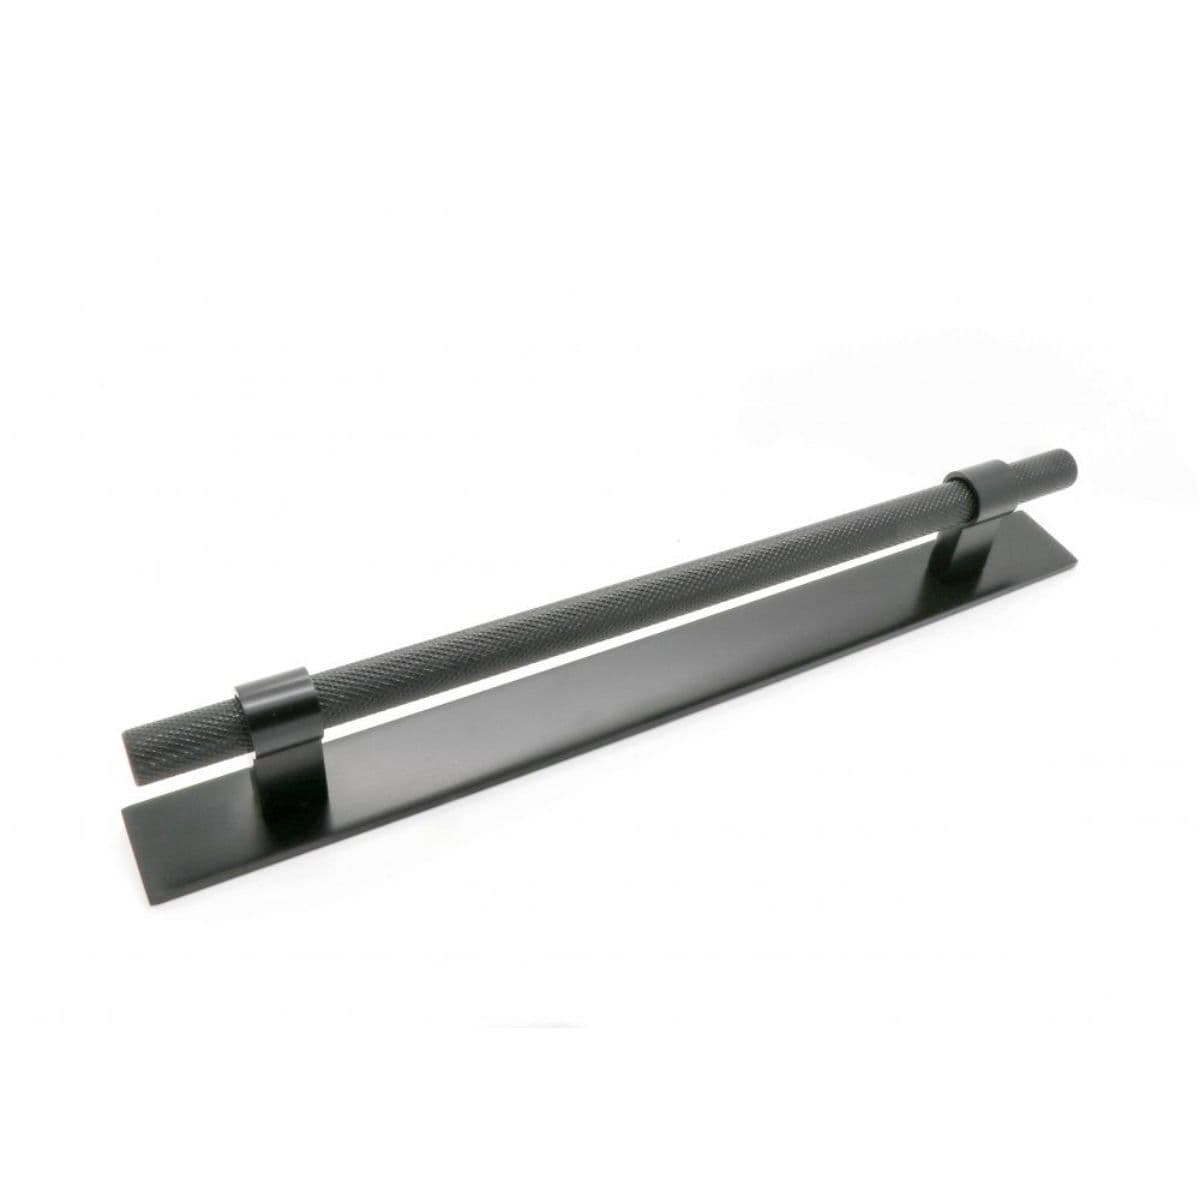 KNURLED T BAR c/w BAR HANDLE BACKPLATE Cupboard Handle - 192mm h/c size - 3 finishes (PWS H1126.257)